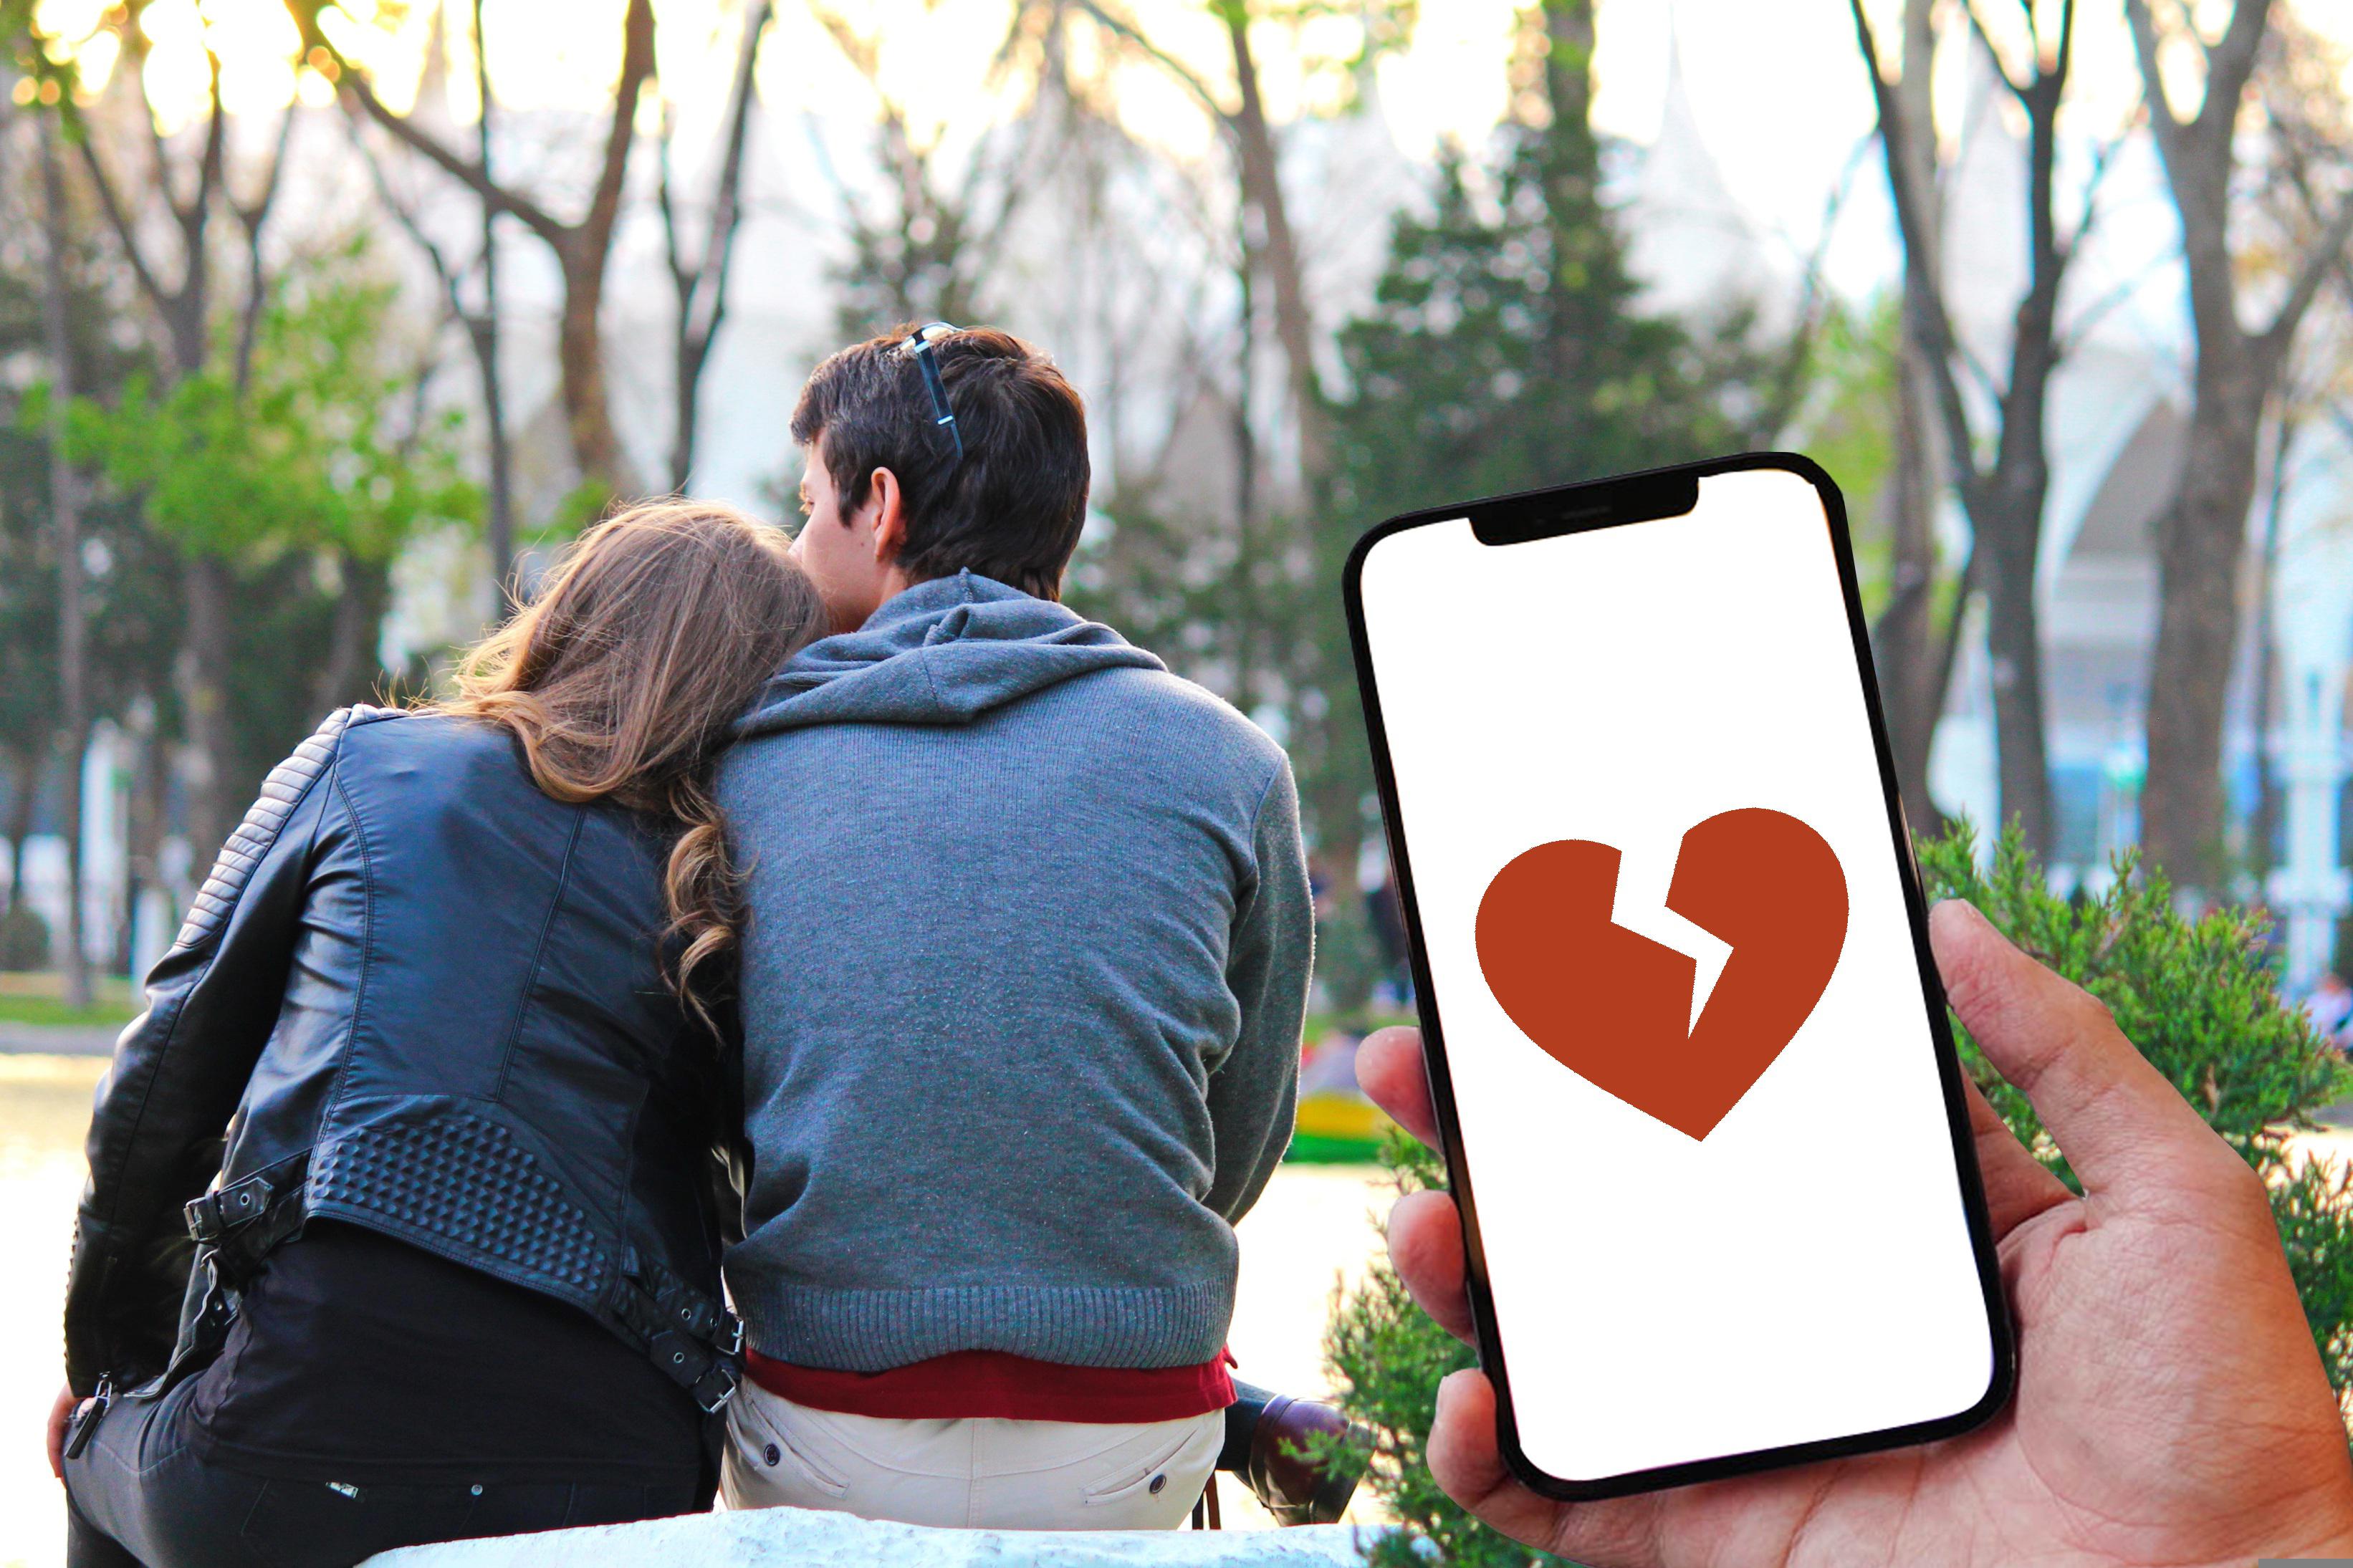 In-love couple, female's head leaning against male's shoulder, sitting on a bench in the park, with a phone picturing a broken heart in the forefront. 